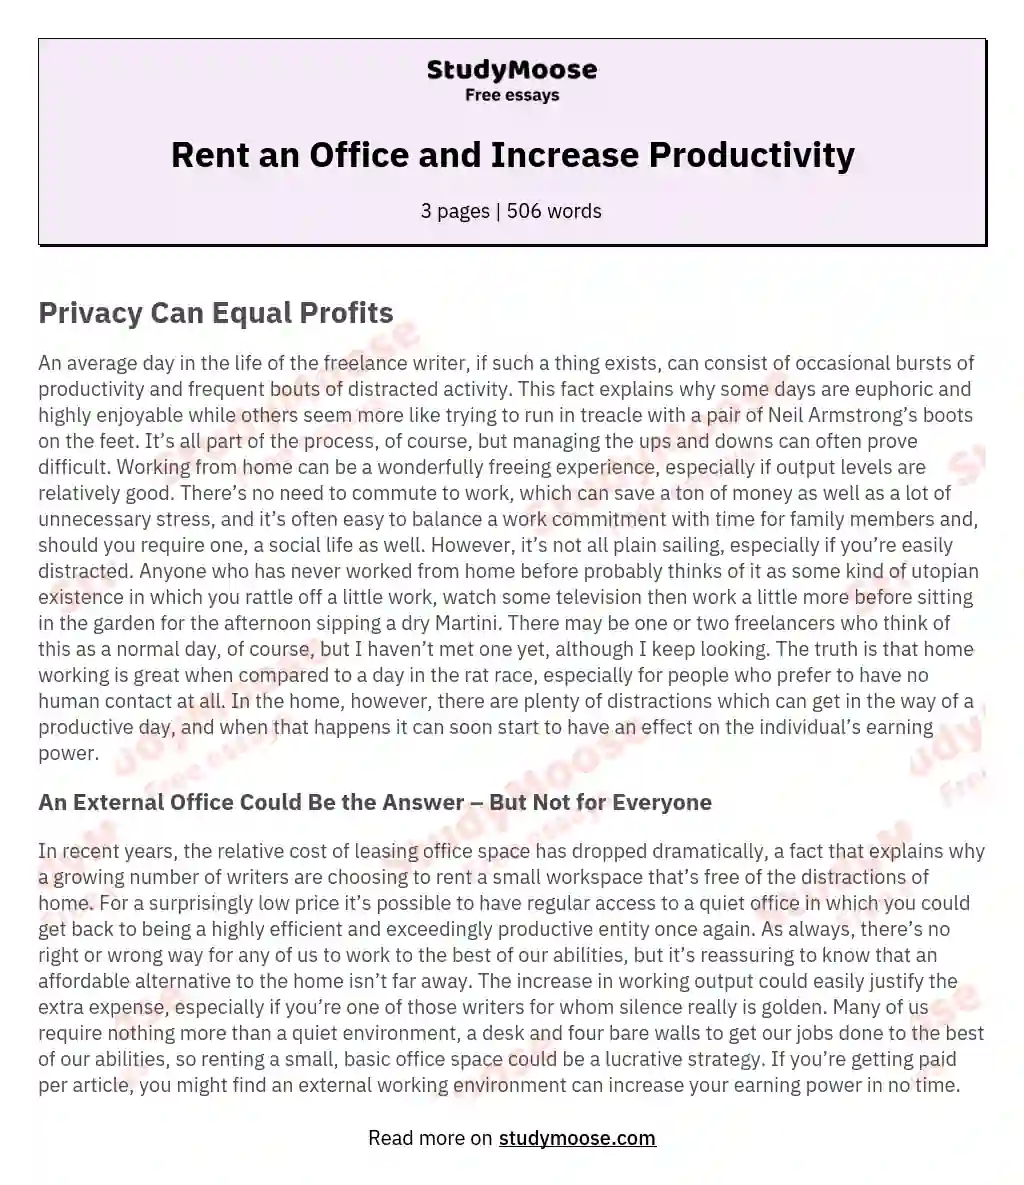 Rent an Office and Increase Productivity essay